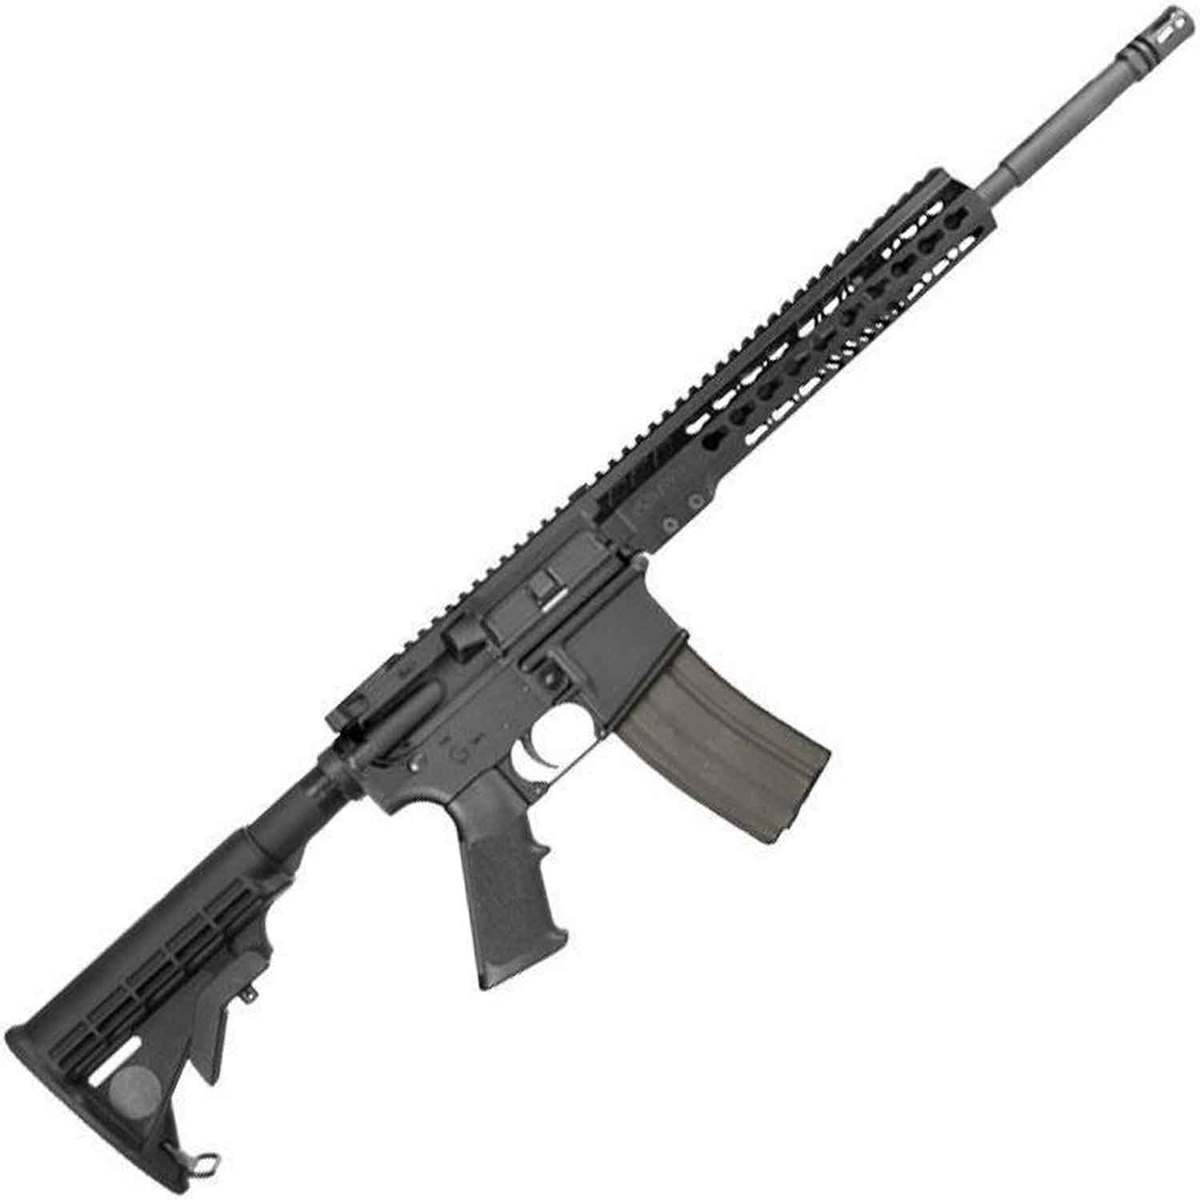 Almindelig salt Skulle Armalite M-15 Light Tactical Carbine 1:7in 5.56mm NATO 16in Black Anodize  Semi Automatic Modern Sporting Rifle - 30+1 Rounds | Sportsman's Warehouse